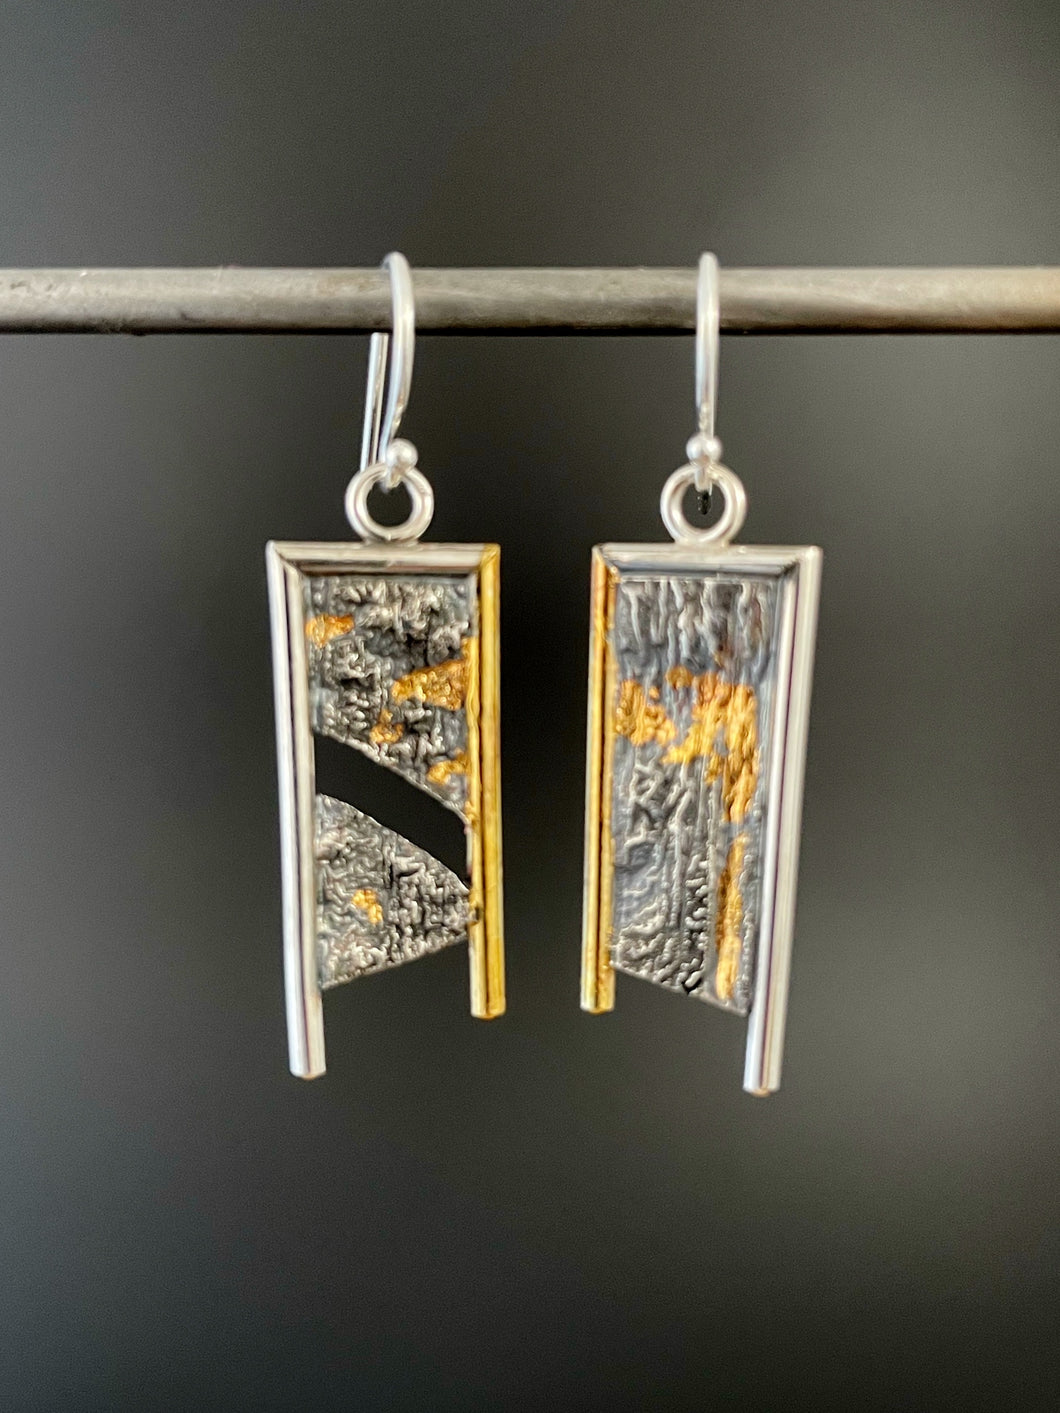 A rectangular pair of earrings, hanging vertically. The top and both sides are framed in wire - silver on the top and outside edge, gold on the inside. The outside border on each earring hangs lower, with the inside dropping just below the edge of the rectangle. The center of the rectangle is reticulated silver, in a textured, terrain-like pattern. The left earring has a gap in the main portion, running diagonally upper left to lower right. Both earrings have gold in the recessed portions.